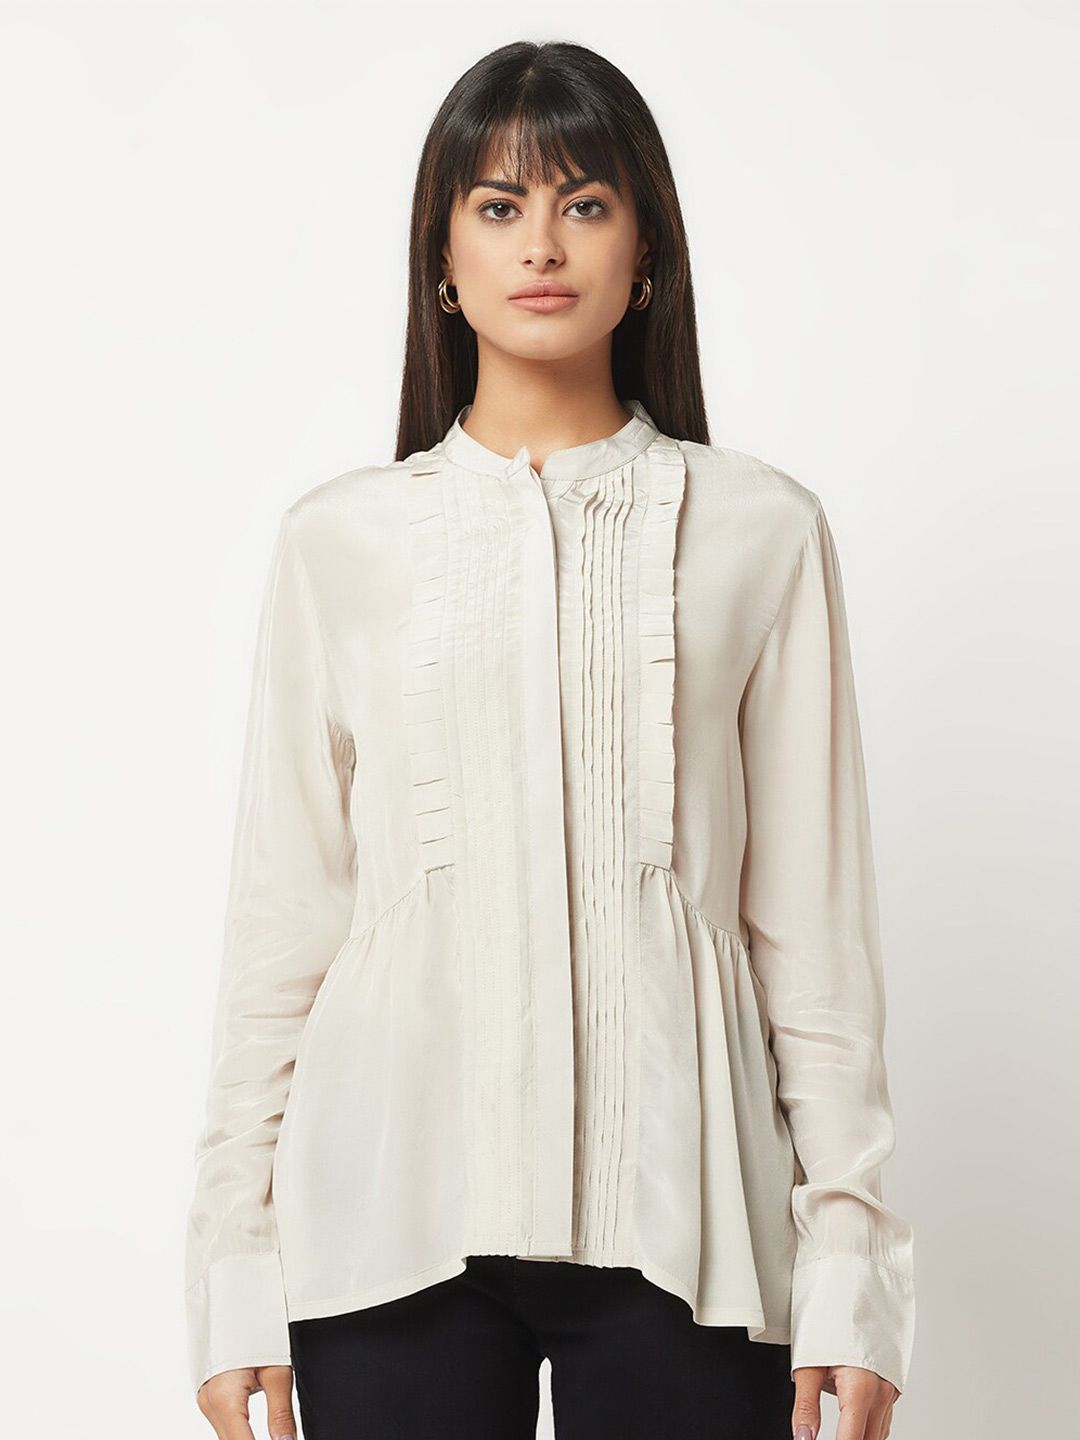 Buy HOUSE OF S HOUSE OF S Floral Printed Embellished Casual Shirt at Redfynd